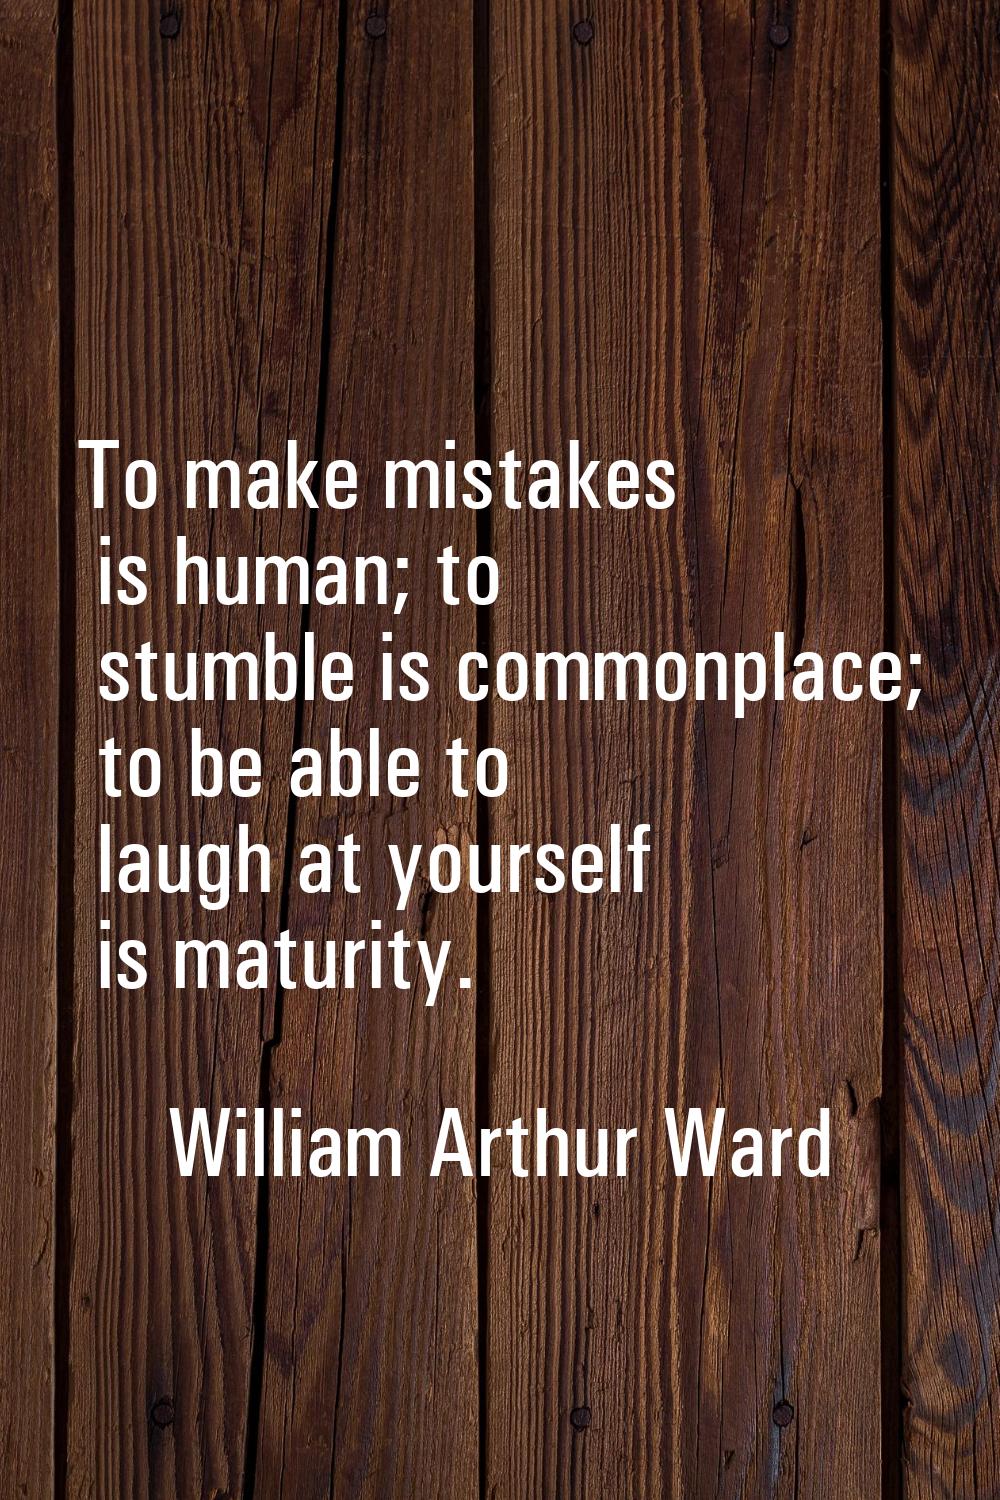 To make mistakes is human; to stumble is commonplace; to be able to laugh at yourself is maturity.